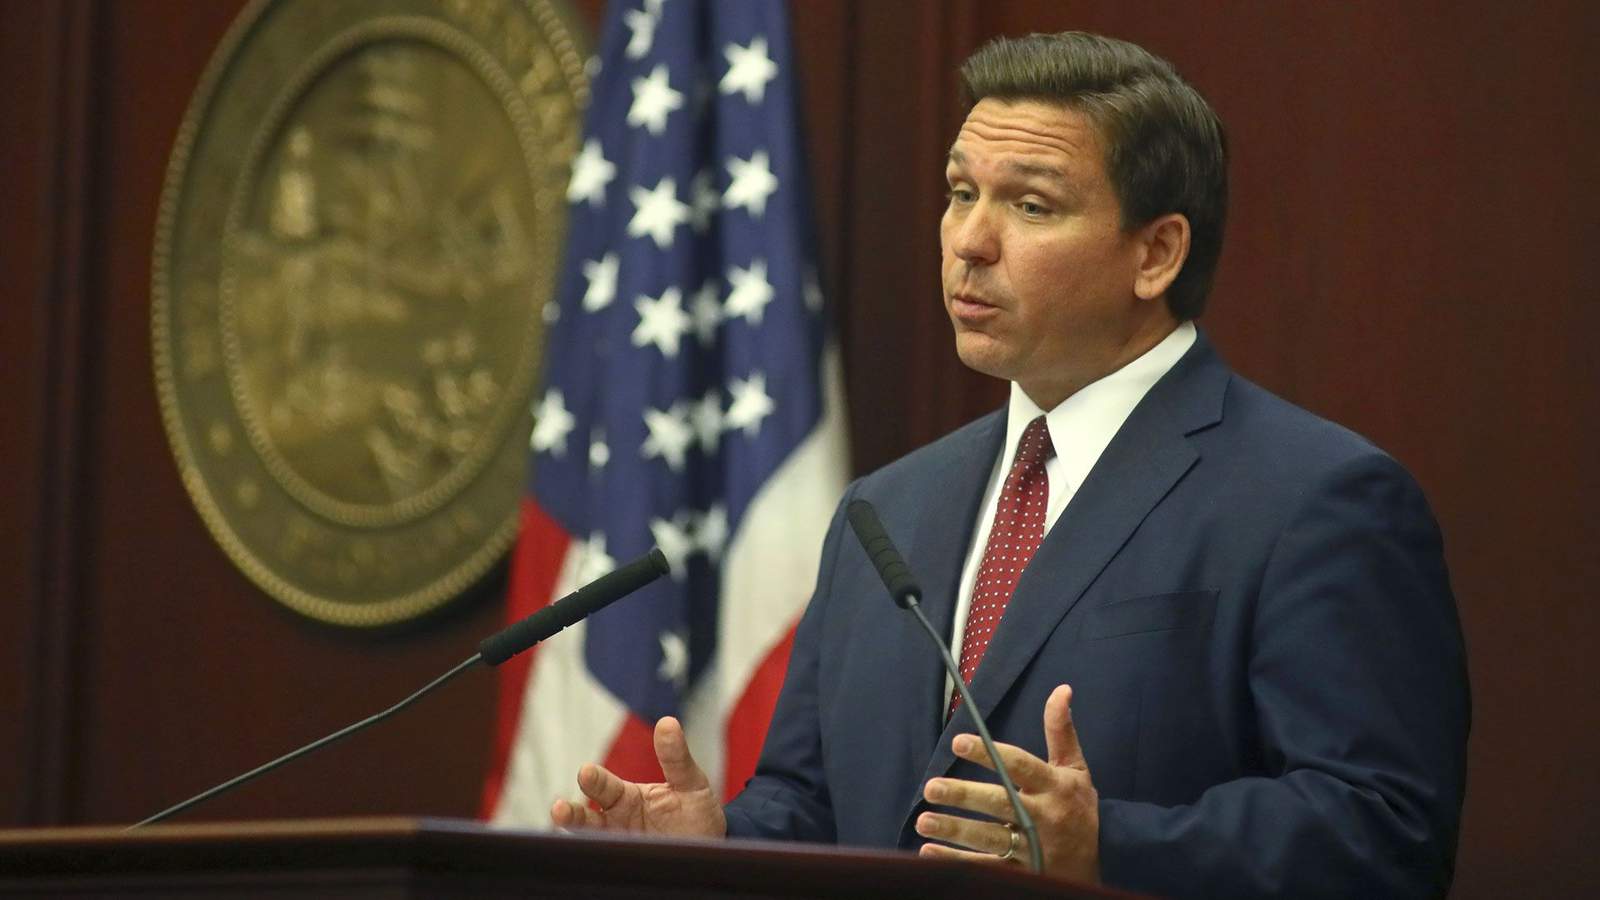 WATCH LIVE: Gov. Ron DeSantis makes appearance in Winter Haven